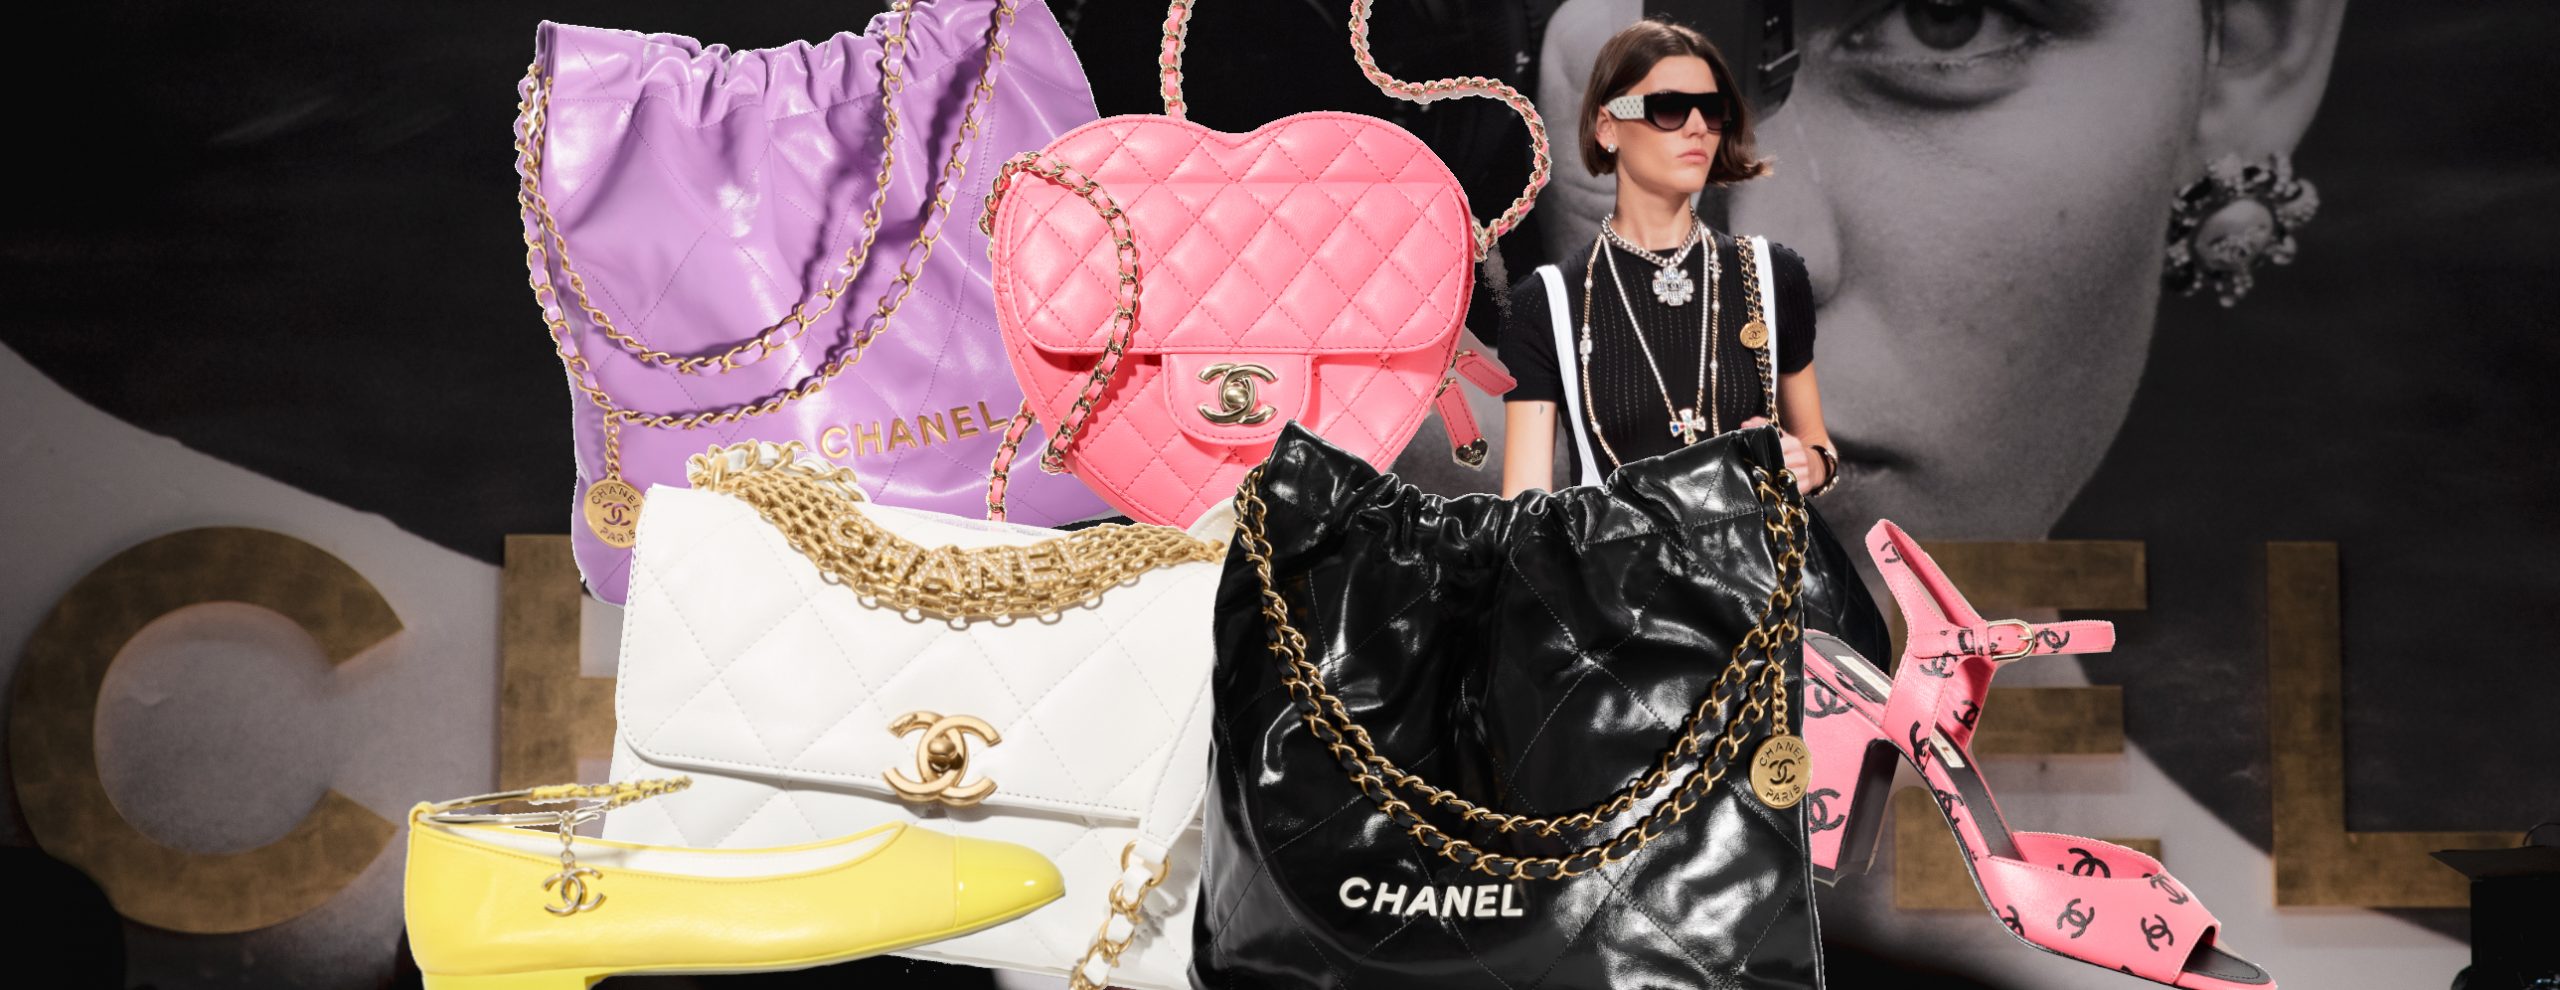 Chanel SpringSummer 2022 Runway Bag Collection  Spotted Fashion